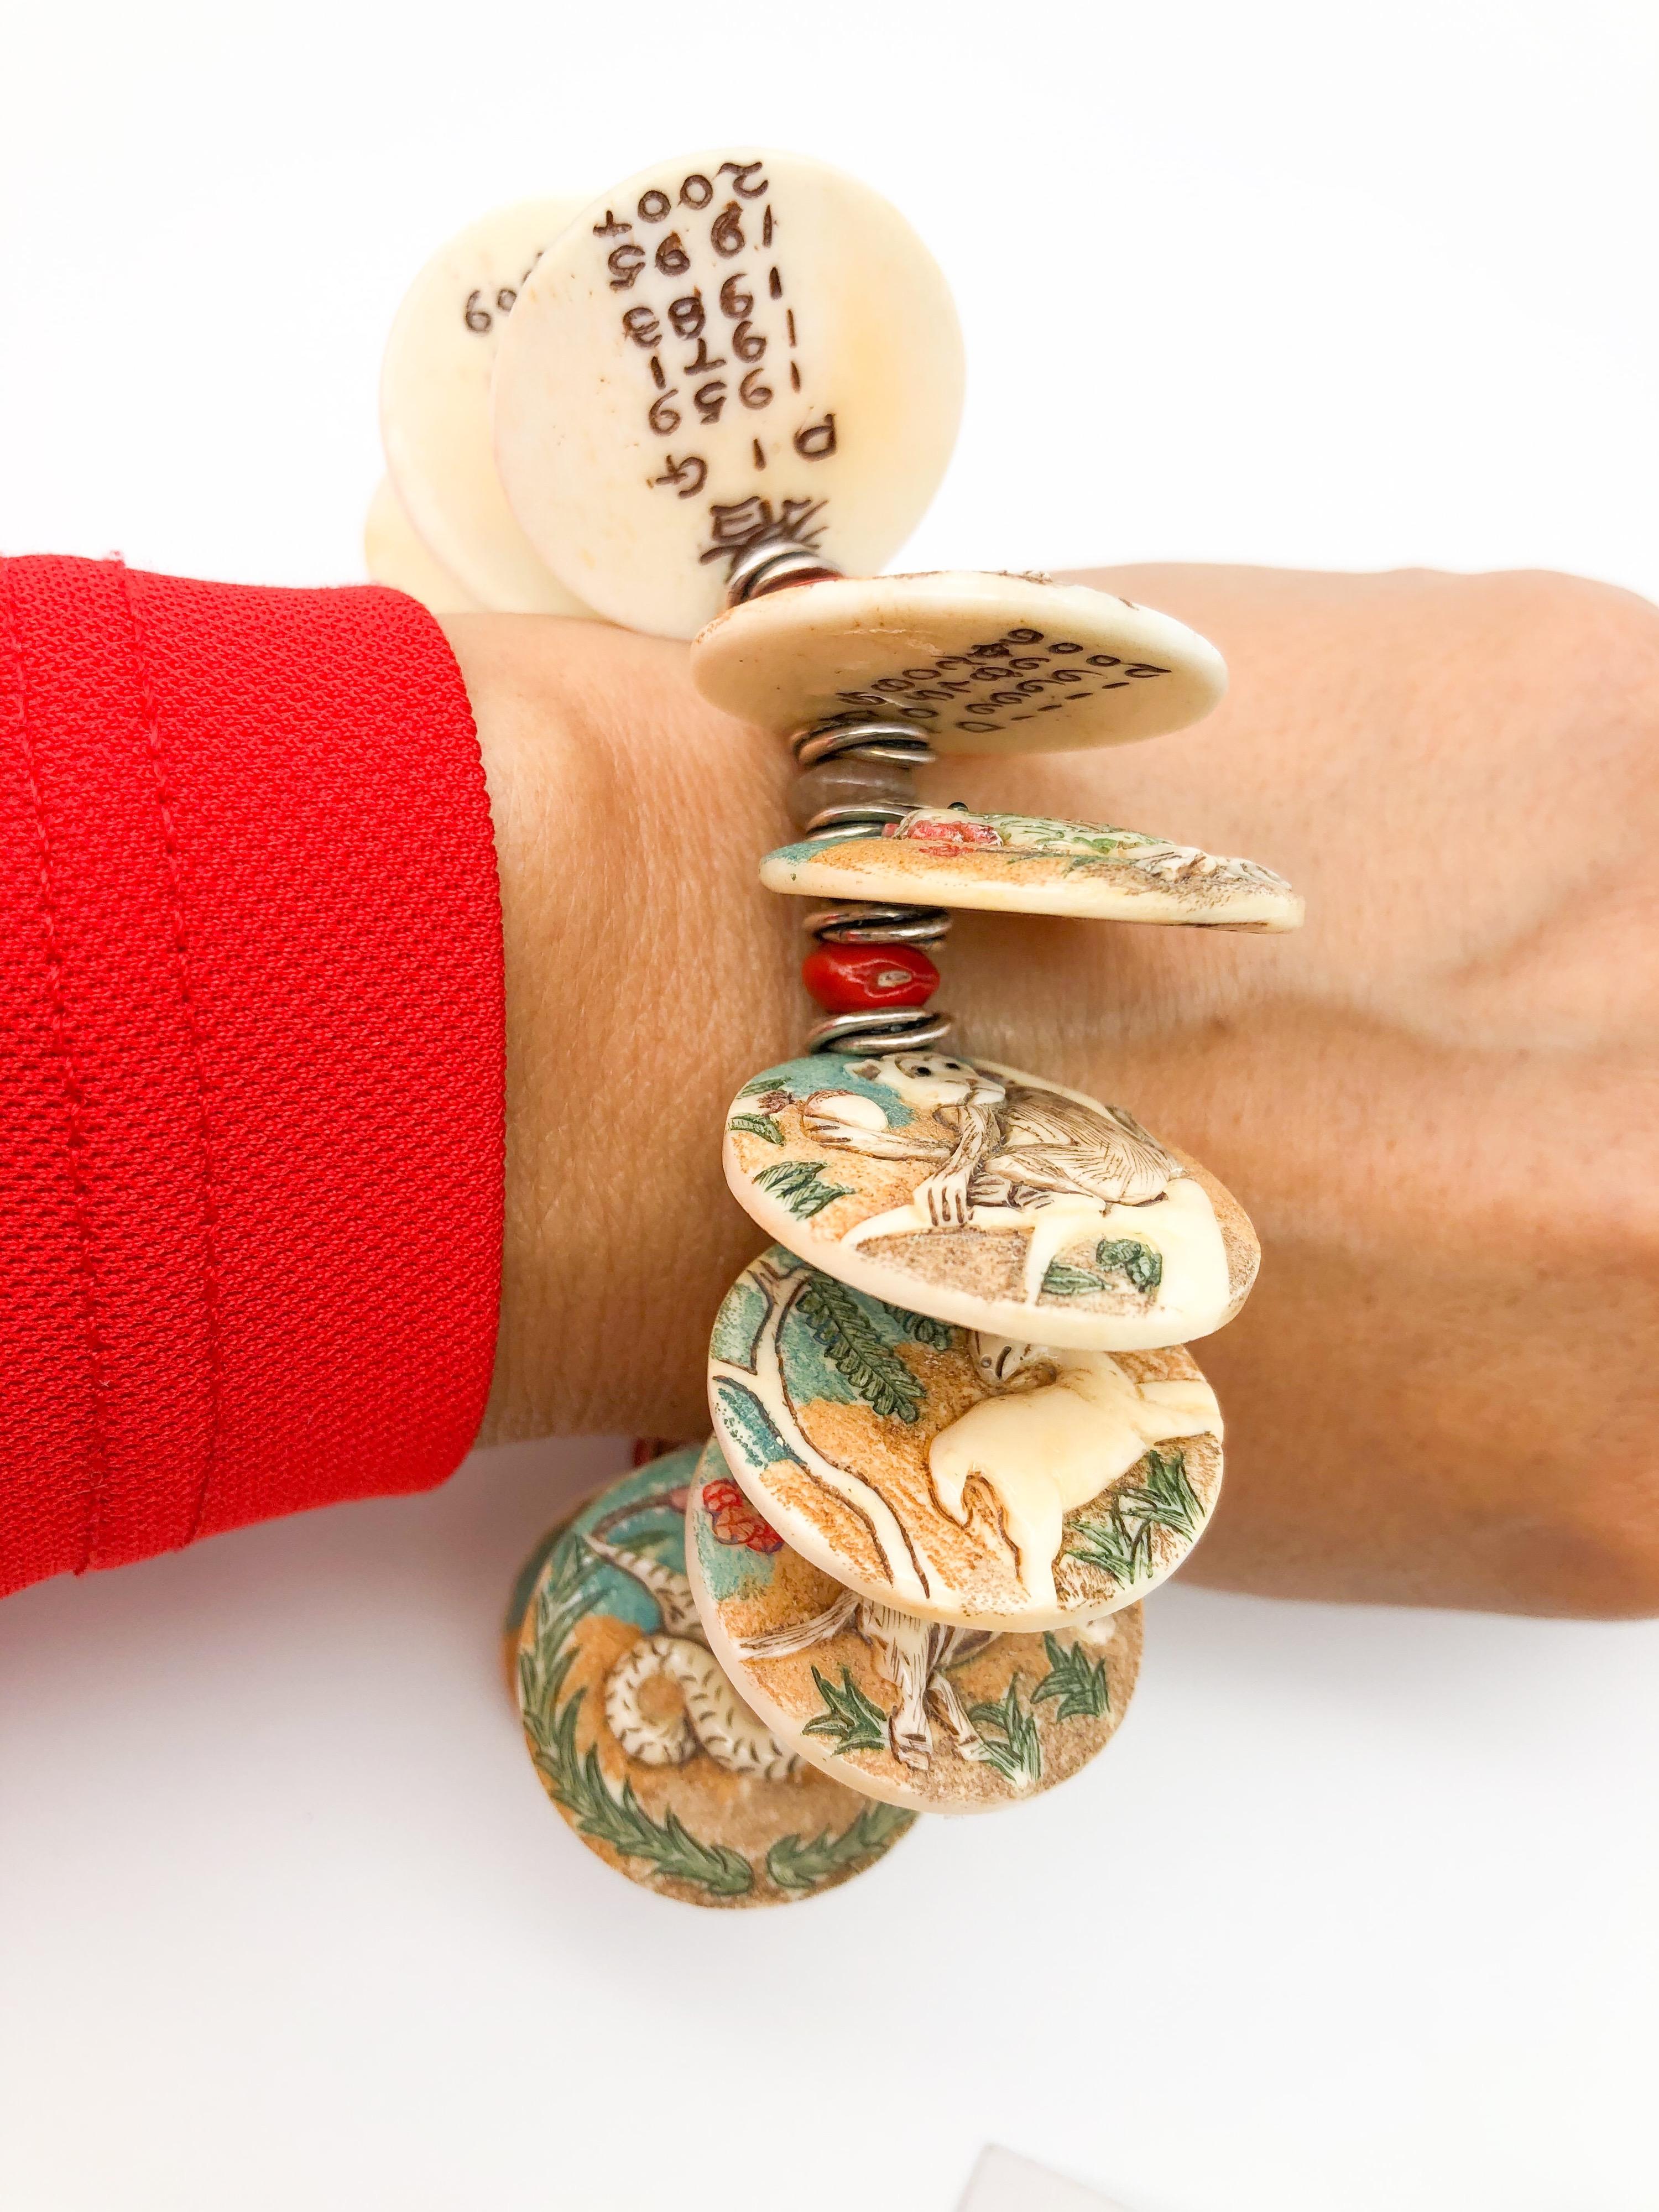 One-of-a-Kind
Exquisitely beautiful. Chinese charm bracelet decorated with colorful hand-painted carved bone animals of the Chinese 12 zodiac sign. The twelve hand-painted zodiacs carved bones are separated by small sparkling red seeds and sterling